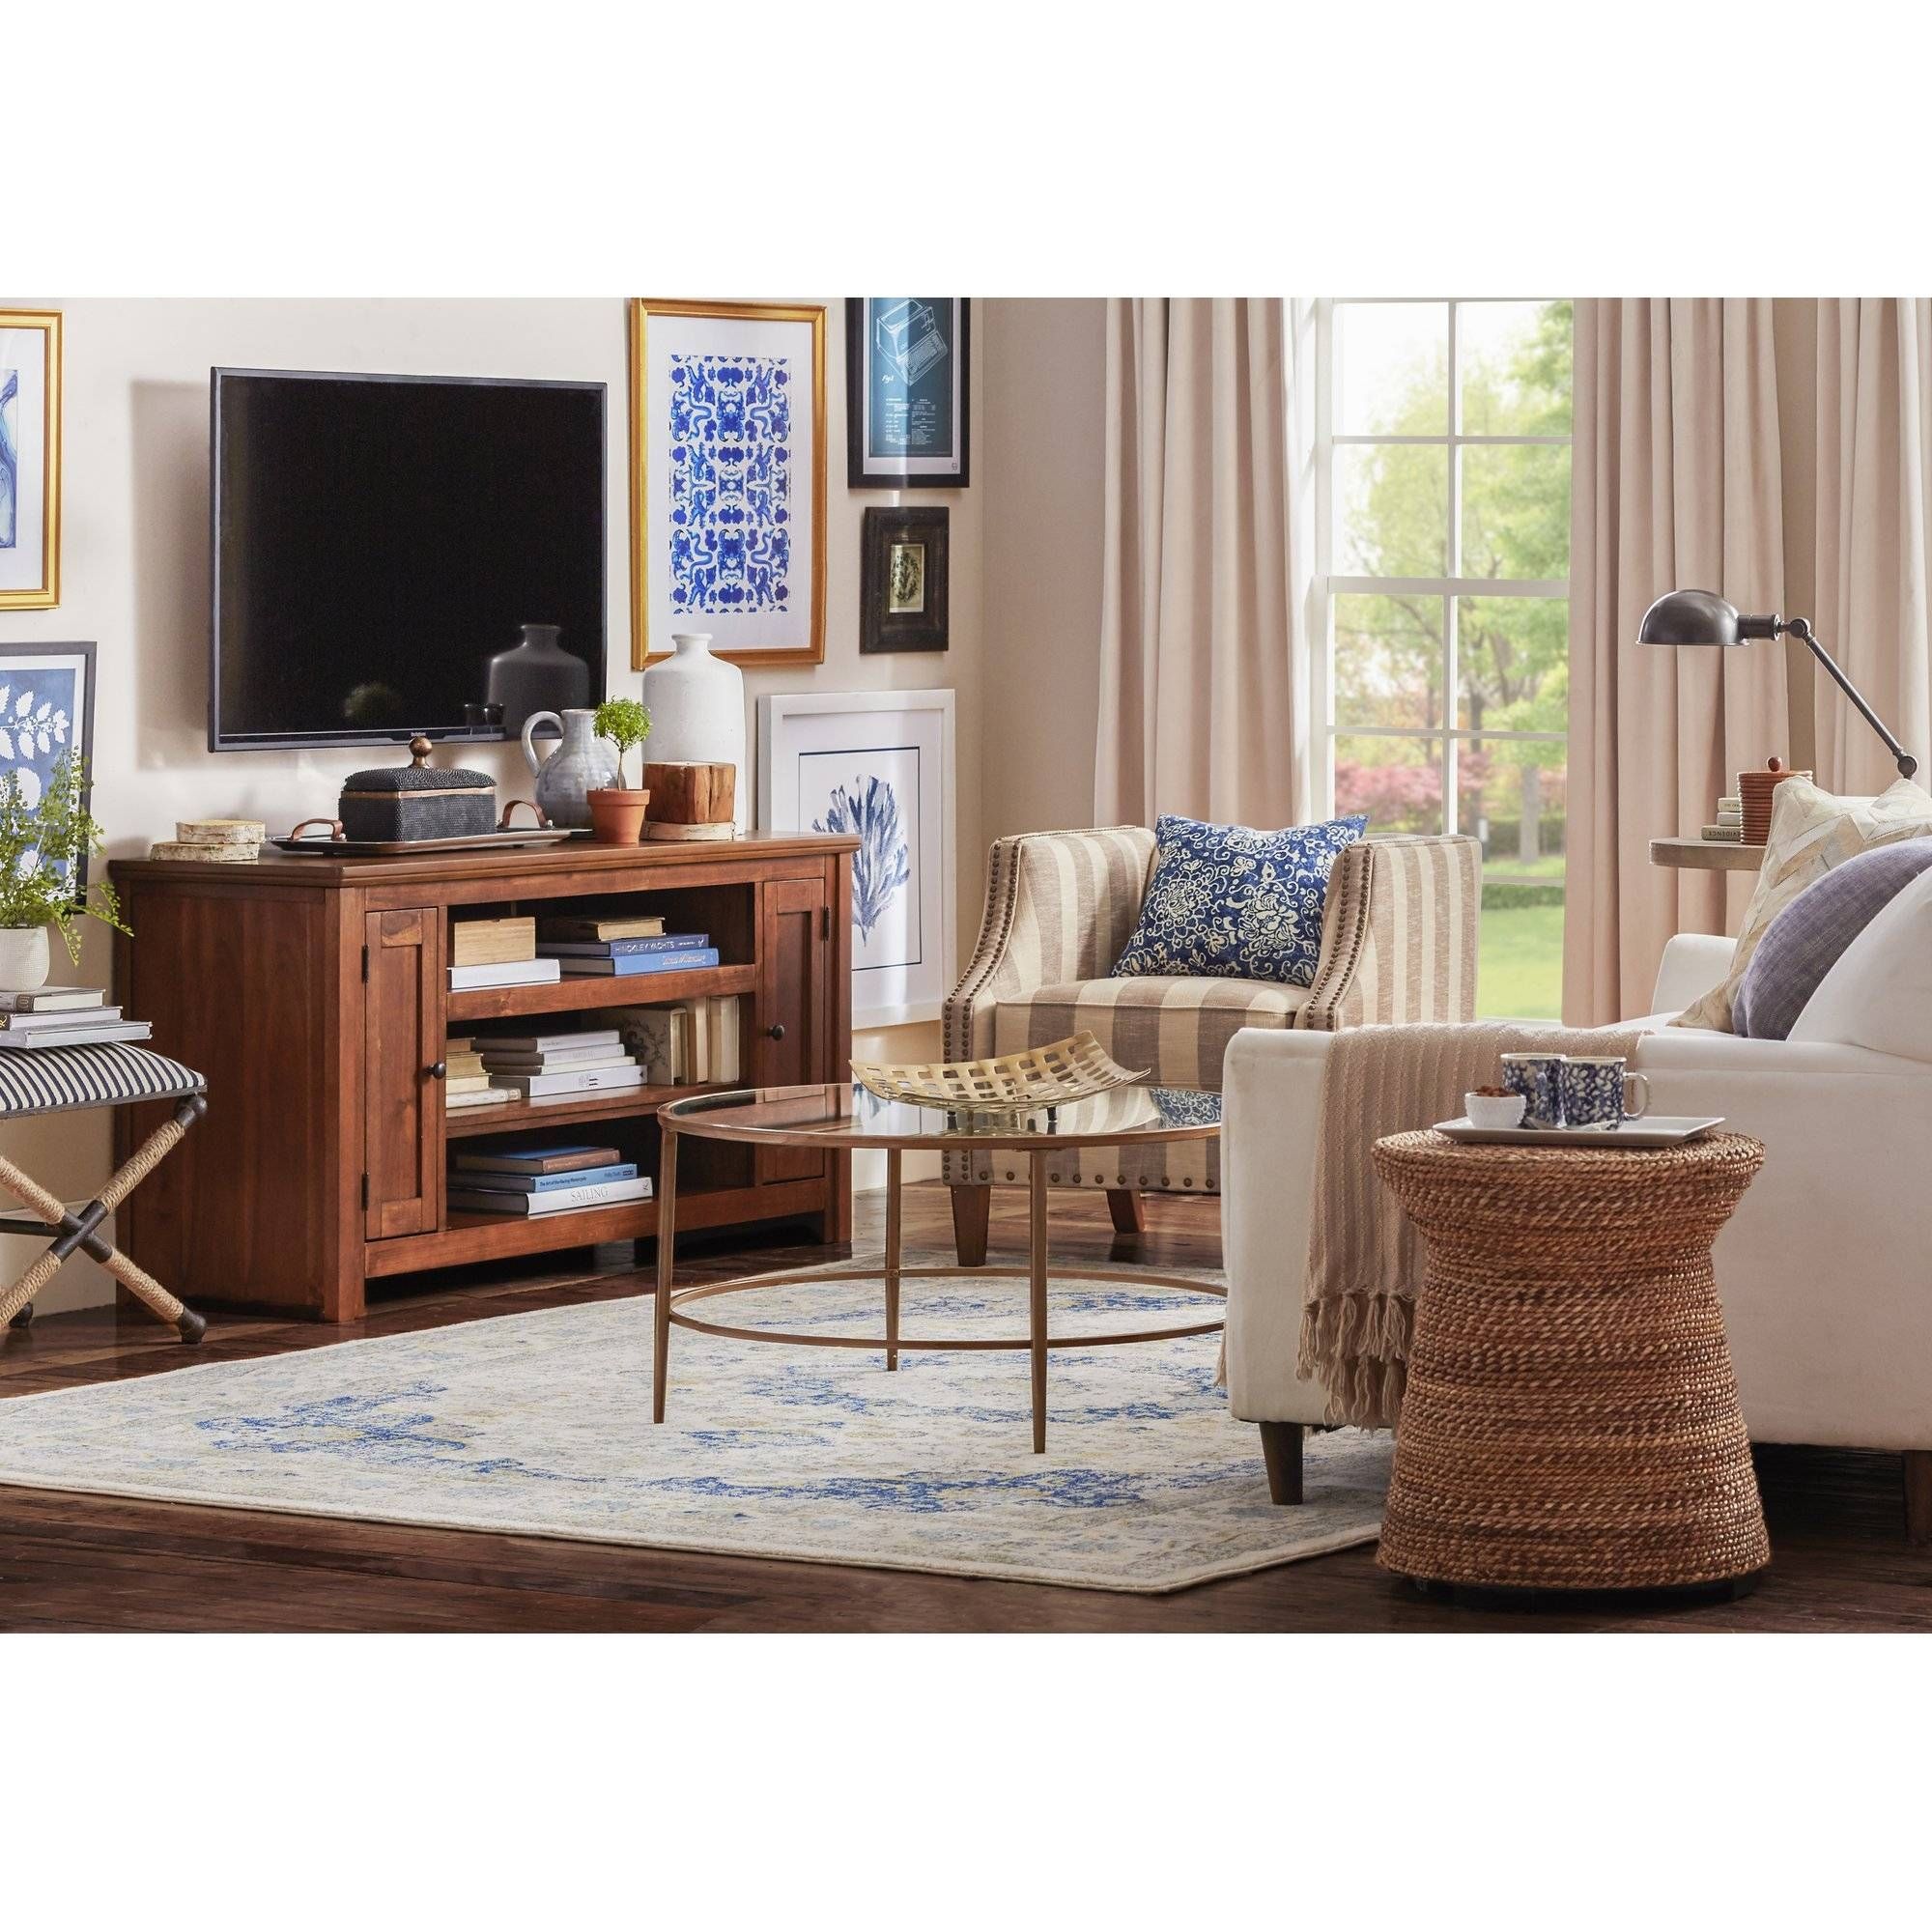 Stylish Coffee Tables And Tv Stands Accent Tables Coffee Table And For Stylish Coffee Tables (View 11 of 30)